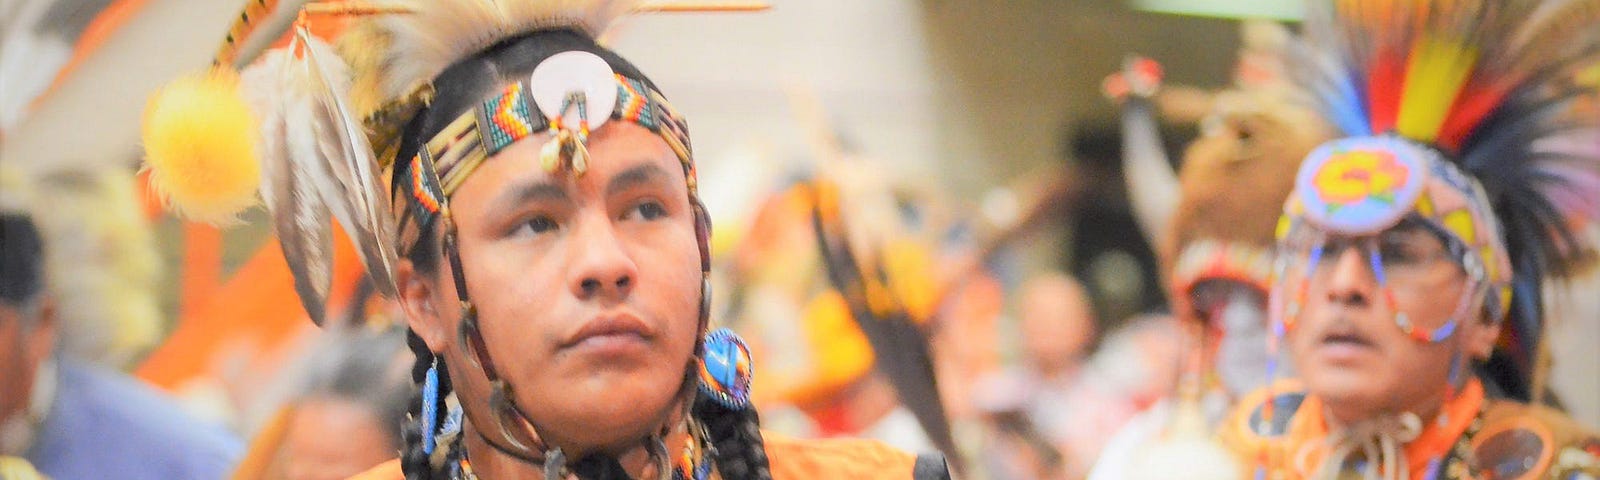 Siksika and Cree dancers perform at the Black Hills Powwow in Rapid City, South Dakota, in 2015.